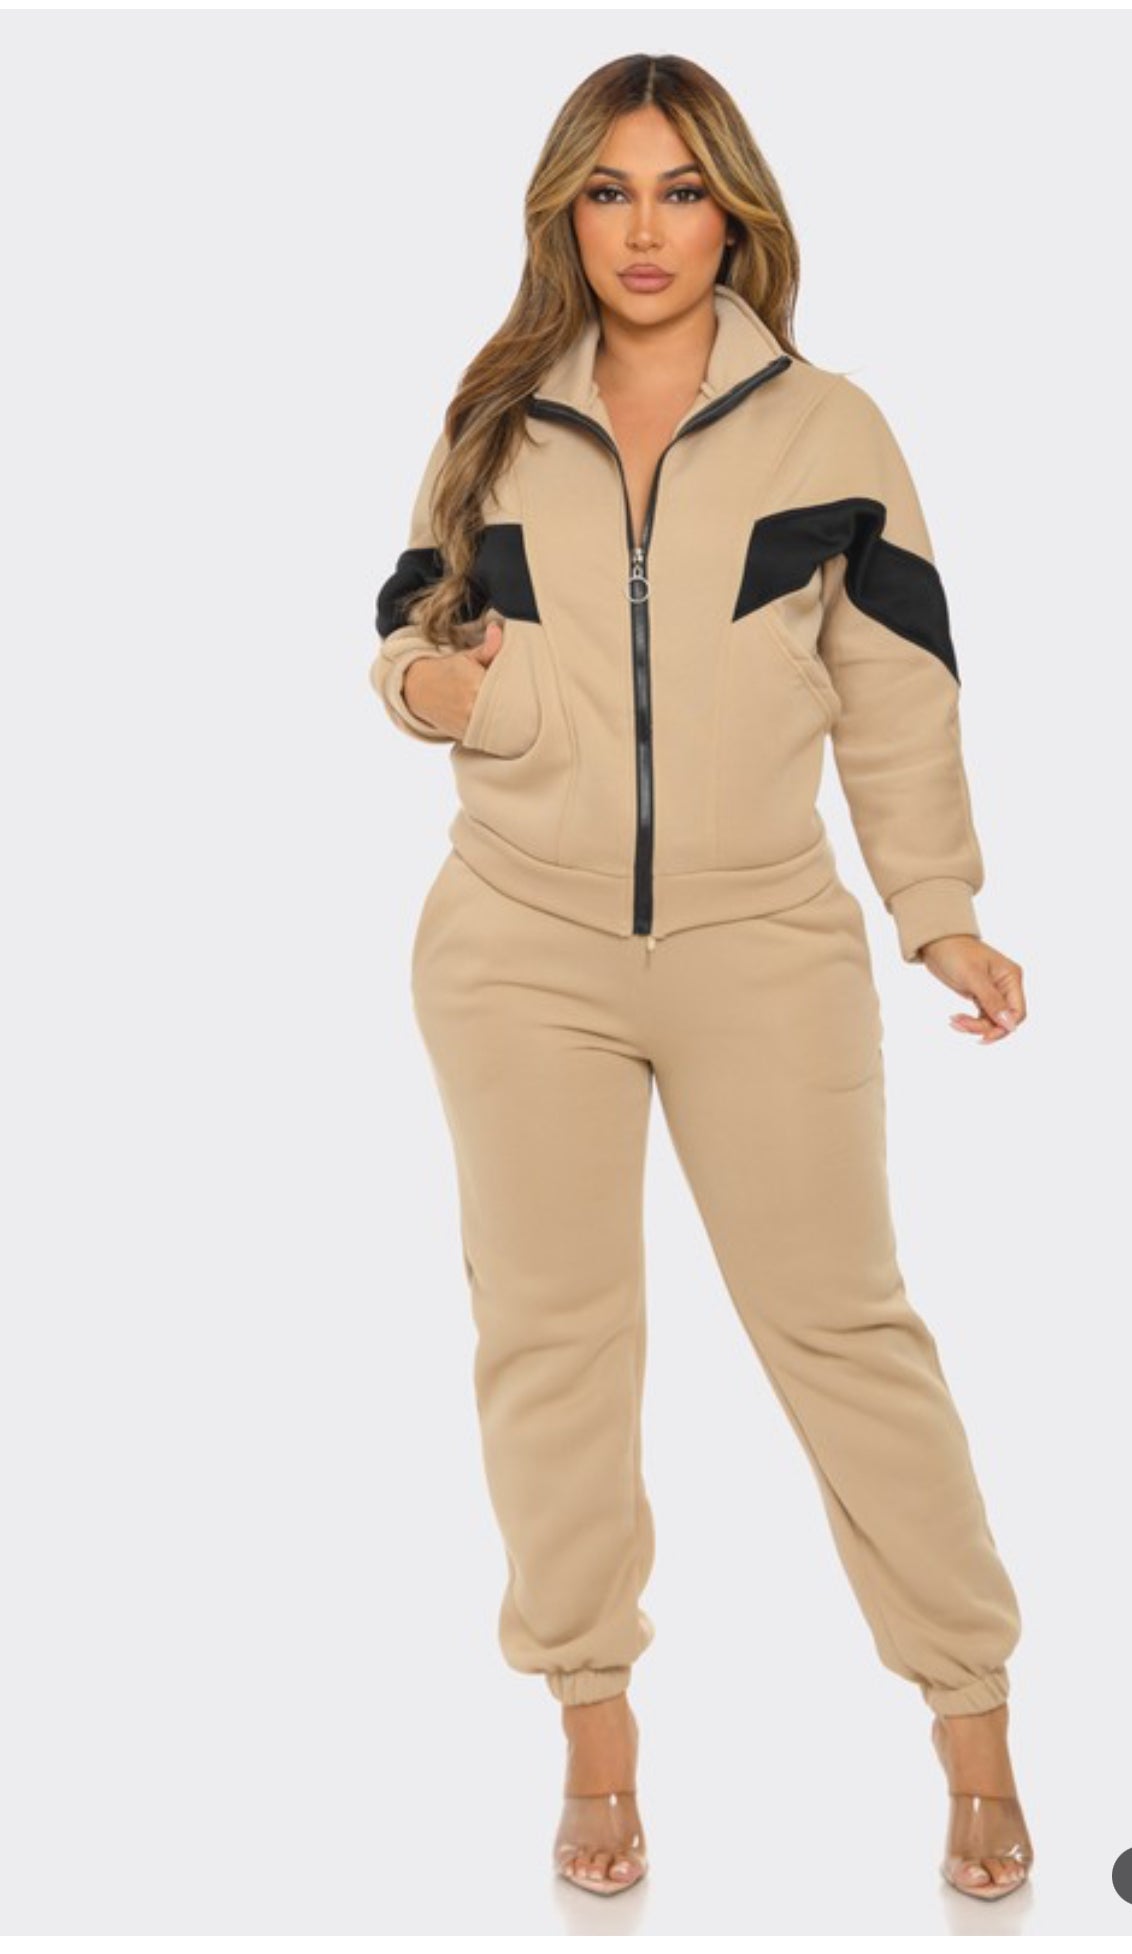 Around The Way Girl Jogger Set (In Tan, and Black)